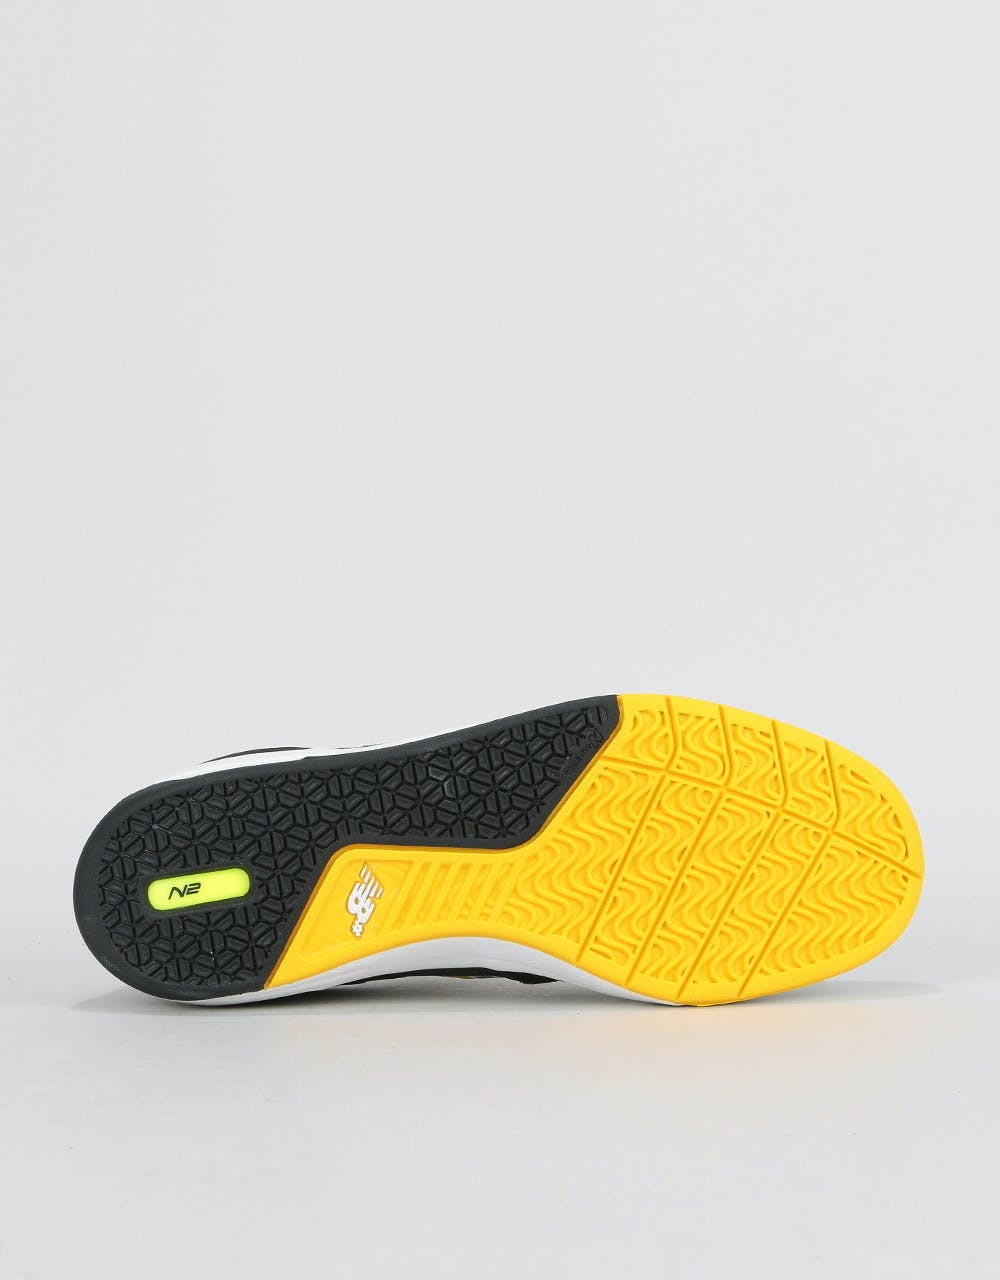 New Balance Numeric 913 Bee Skate Shoes - Black/Yellow